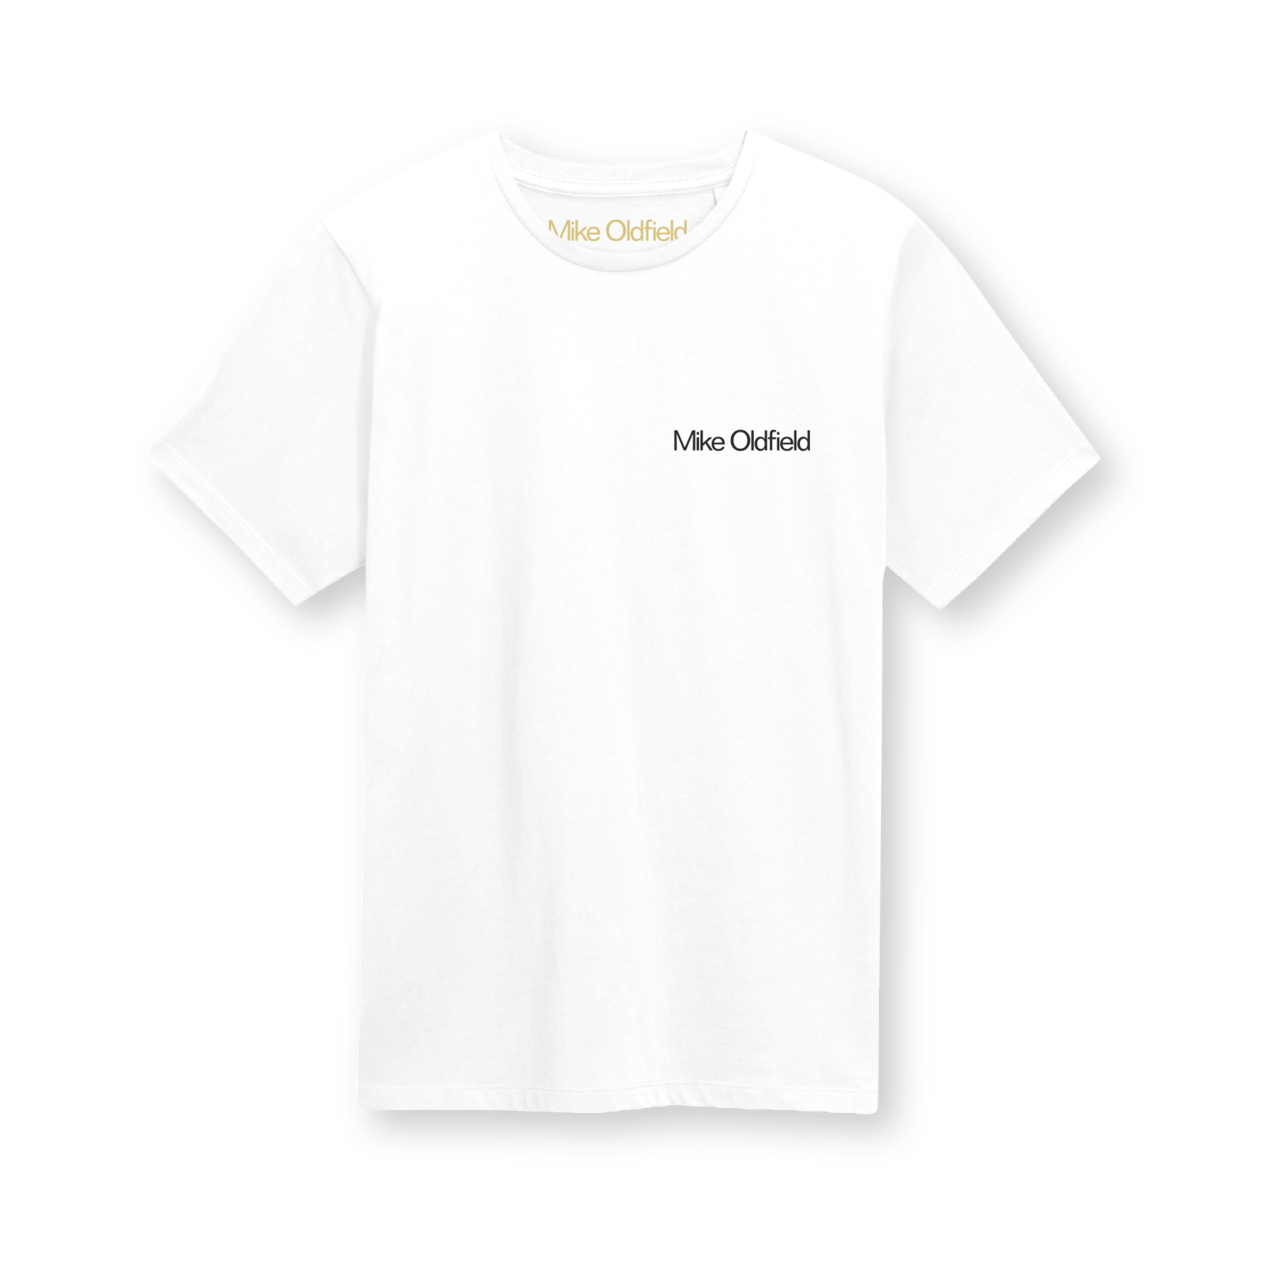 Mike Oldfield - Official Tubular Bells: Classic T-shirt